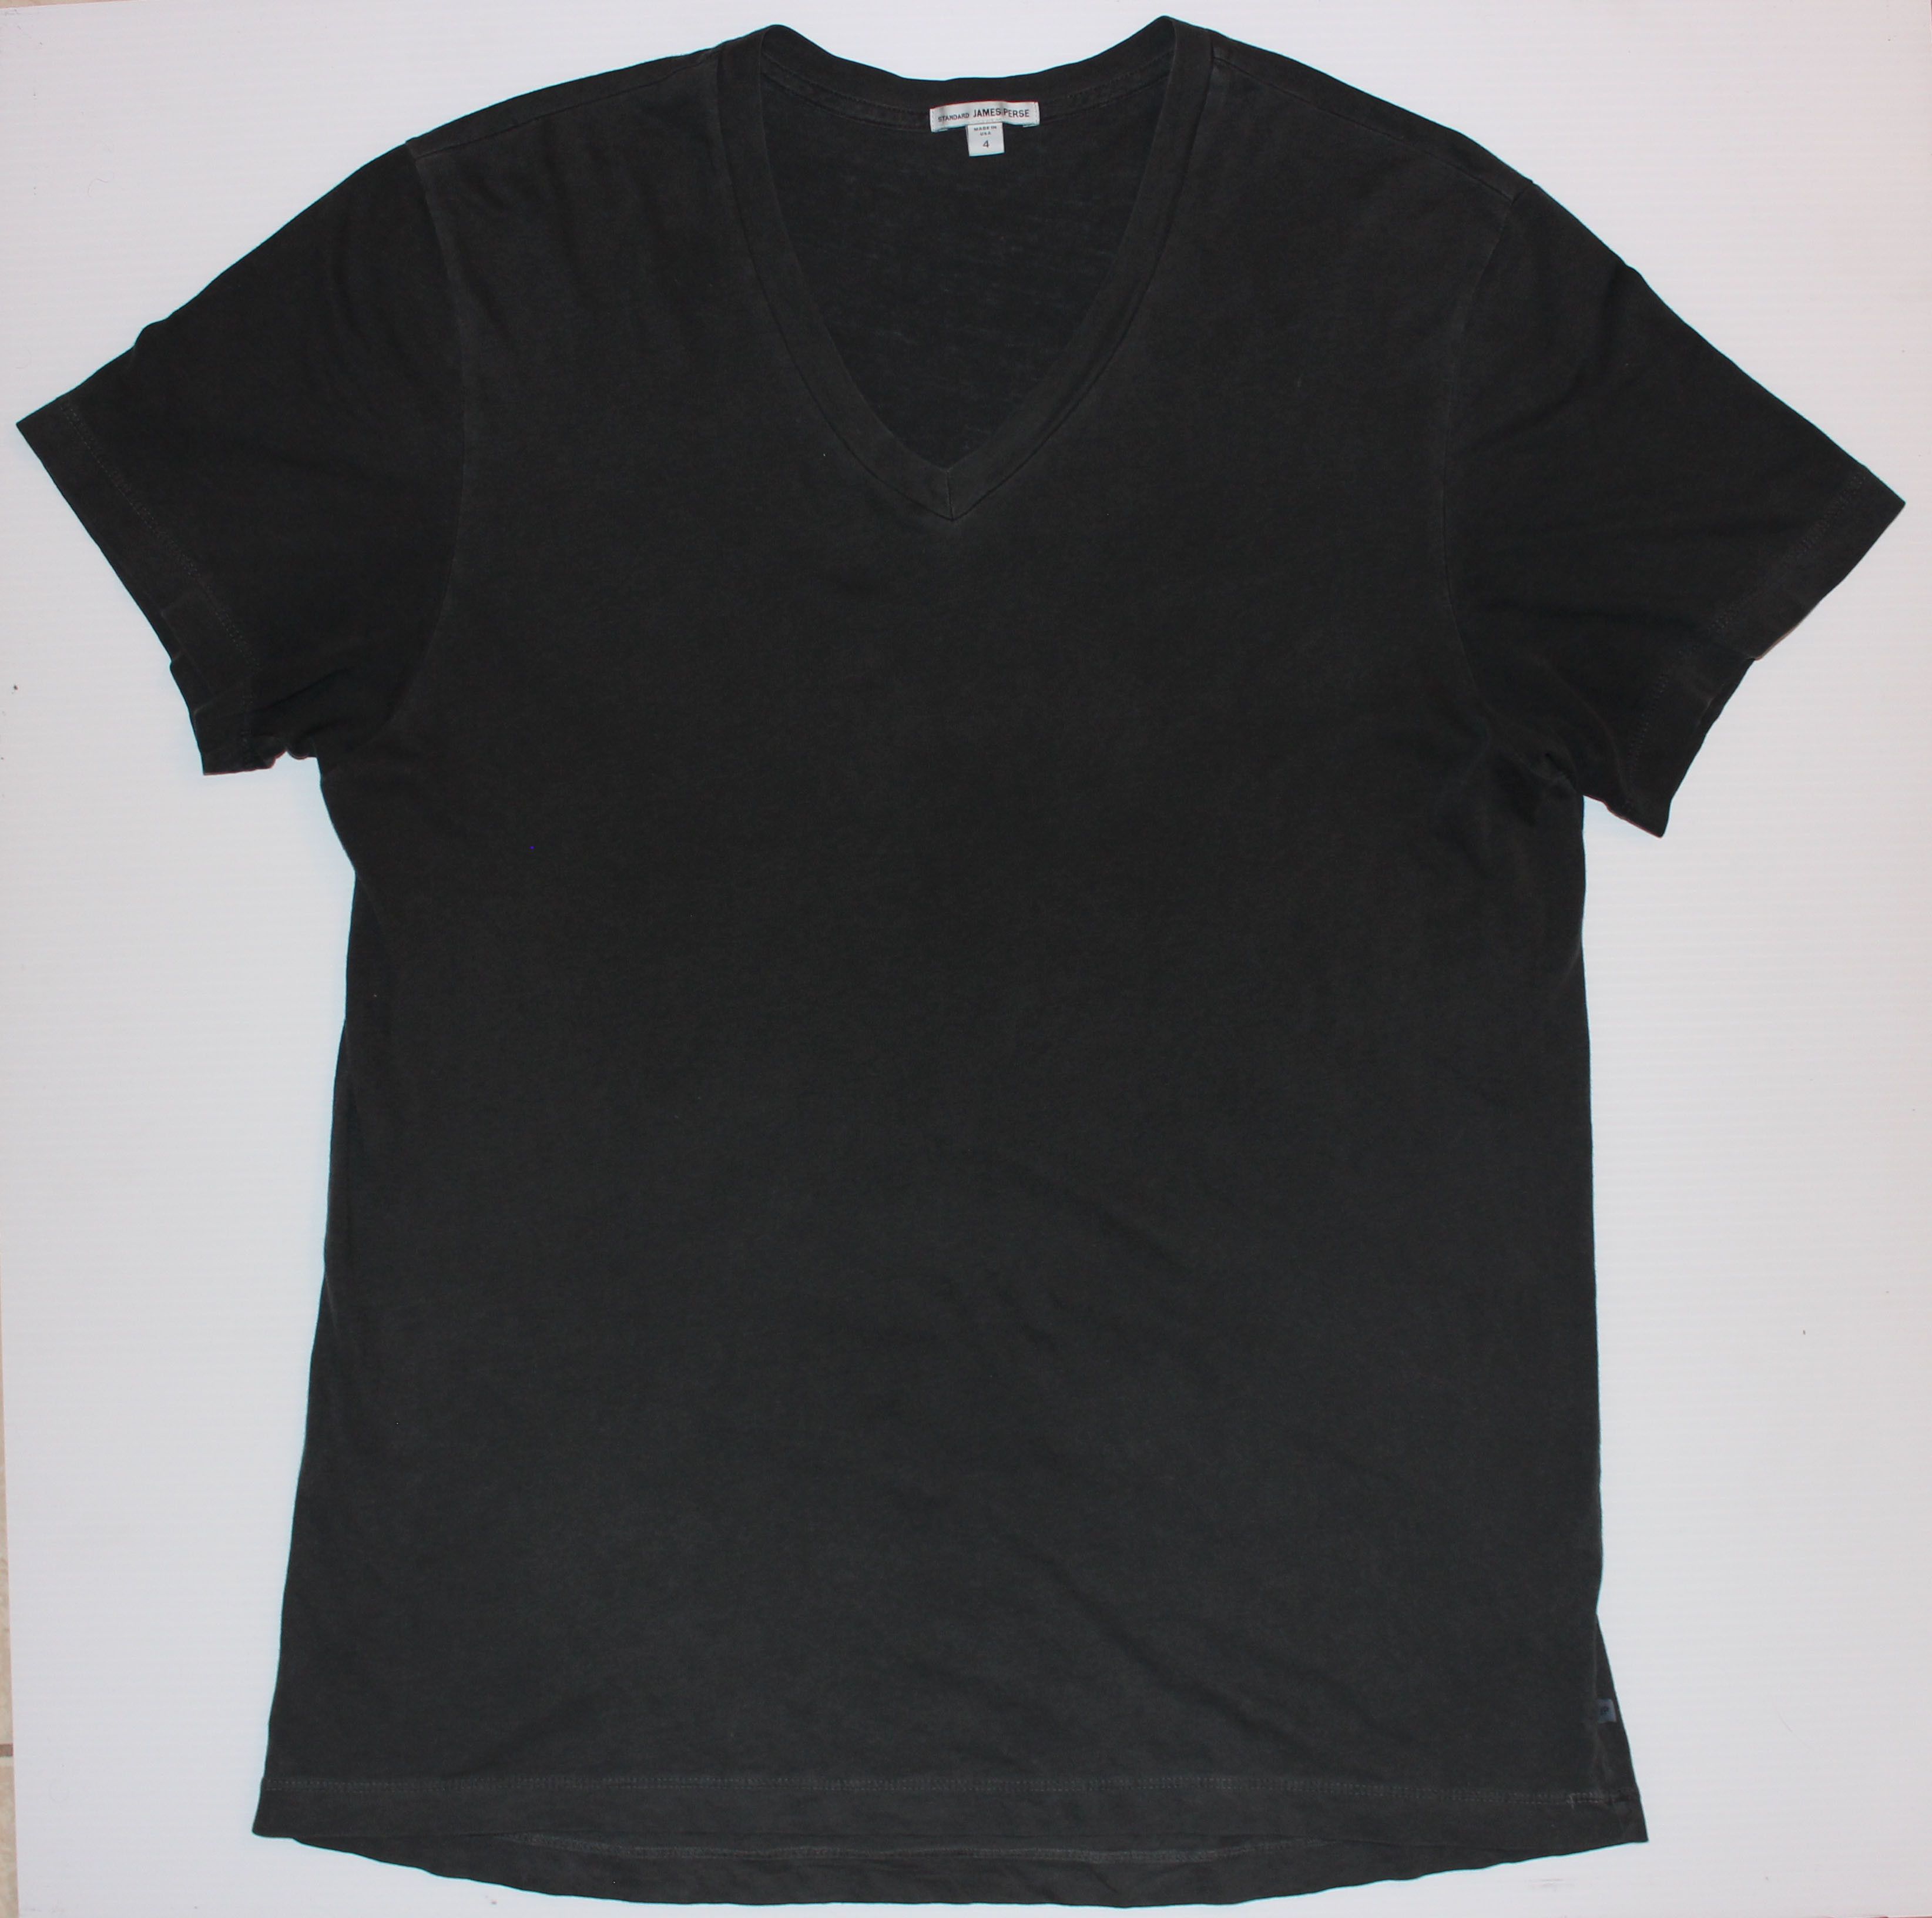 James Perse Charcoal Tee | Grailed